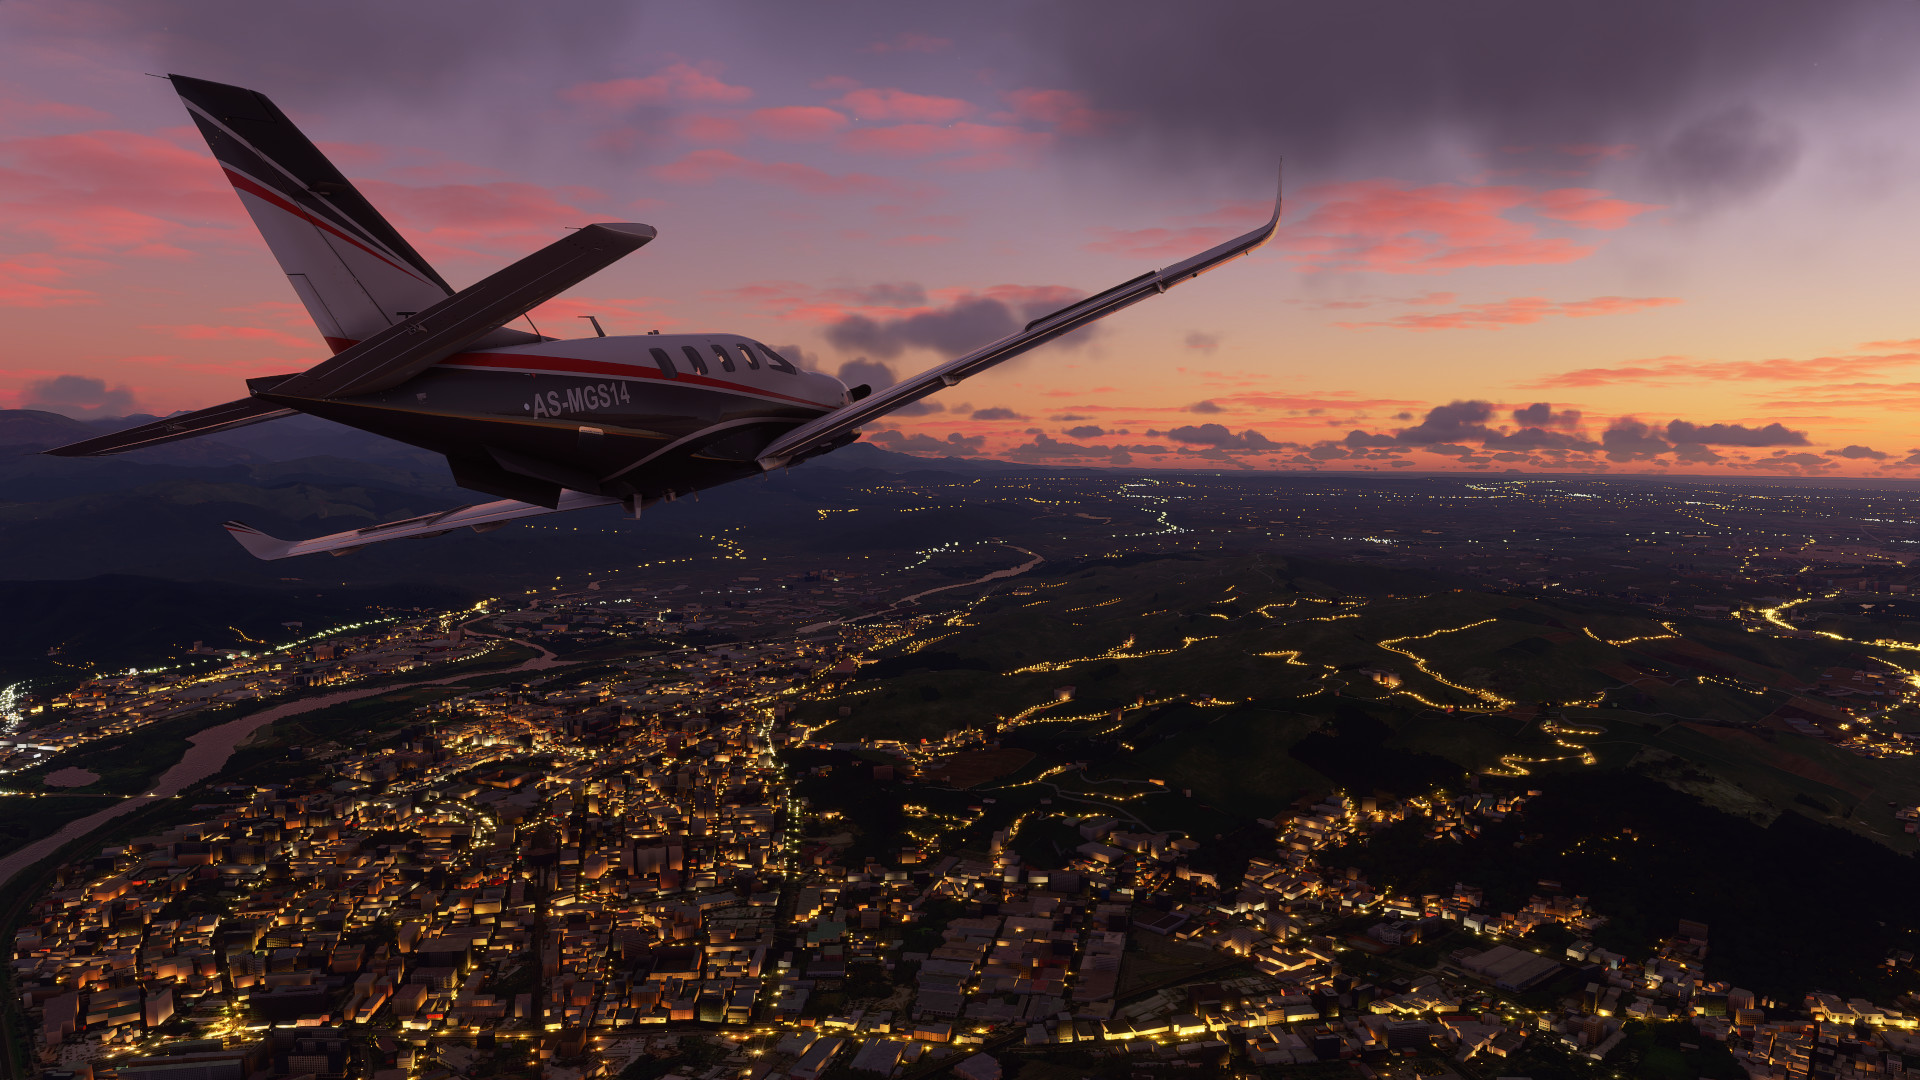 An aircraft flying over a city at sunset in Microsoft Flight Simulator